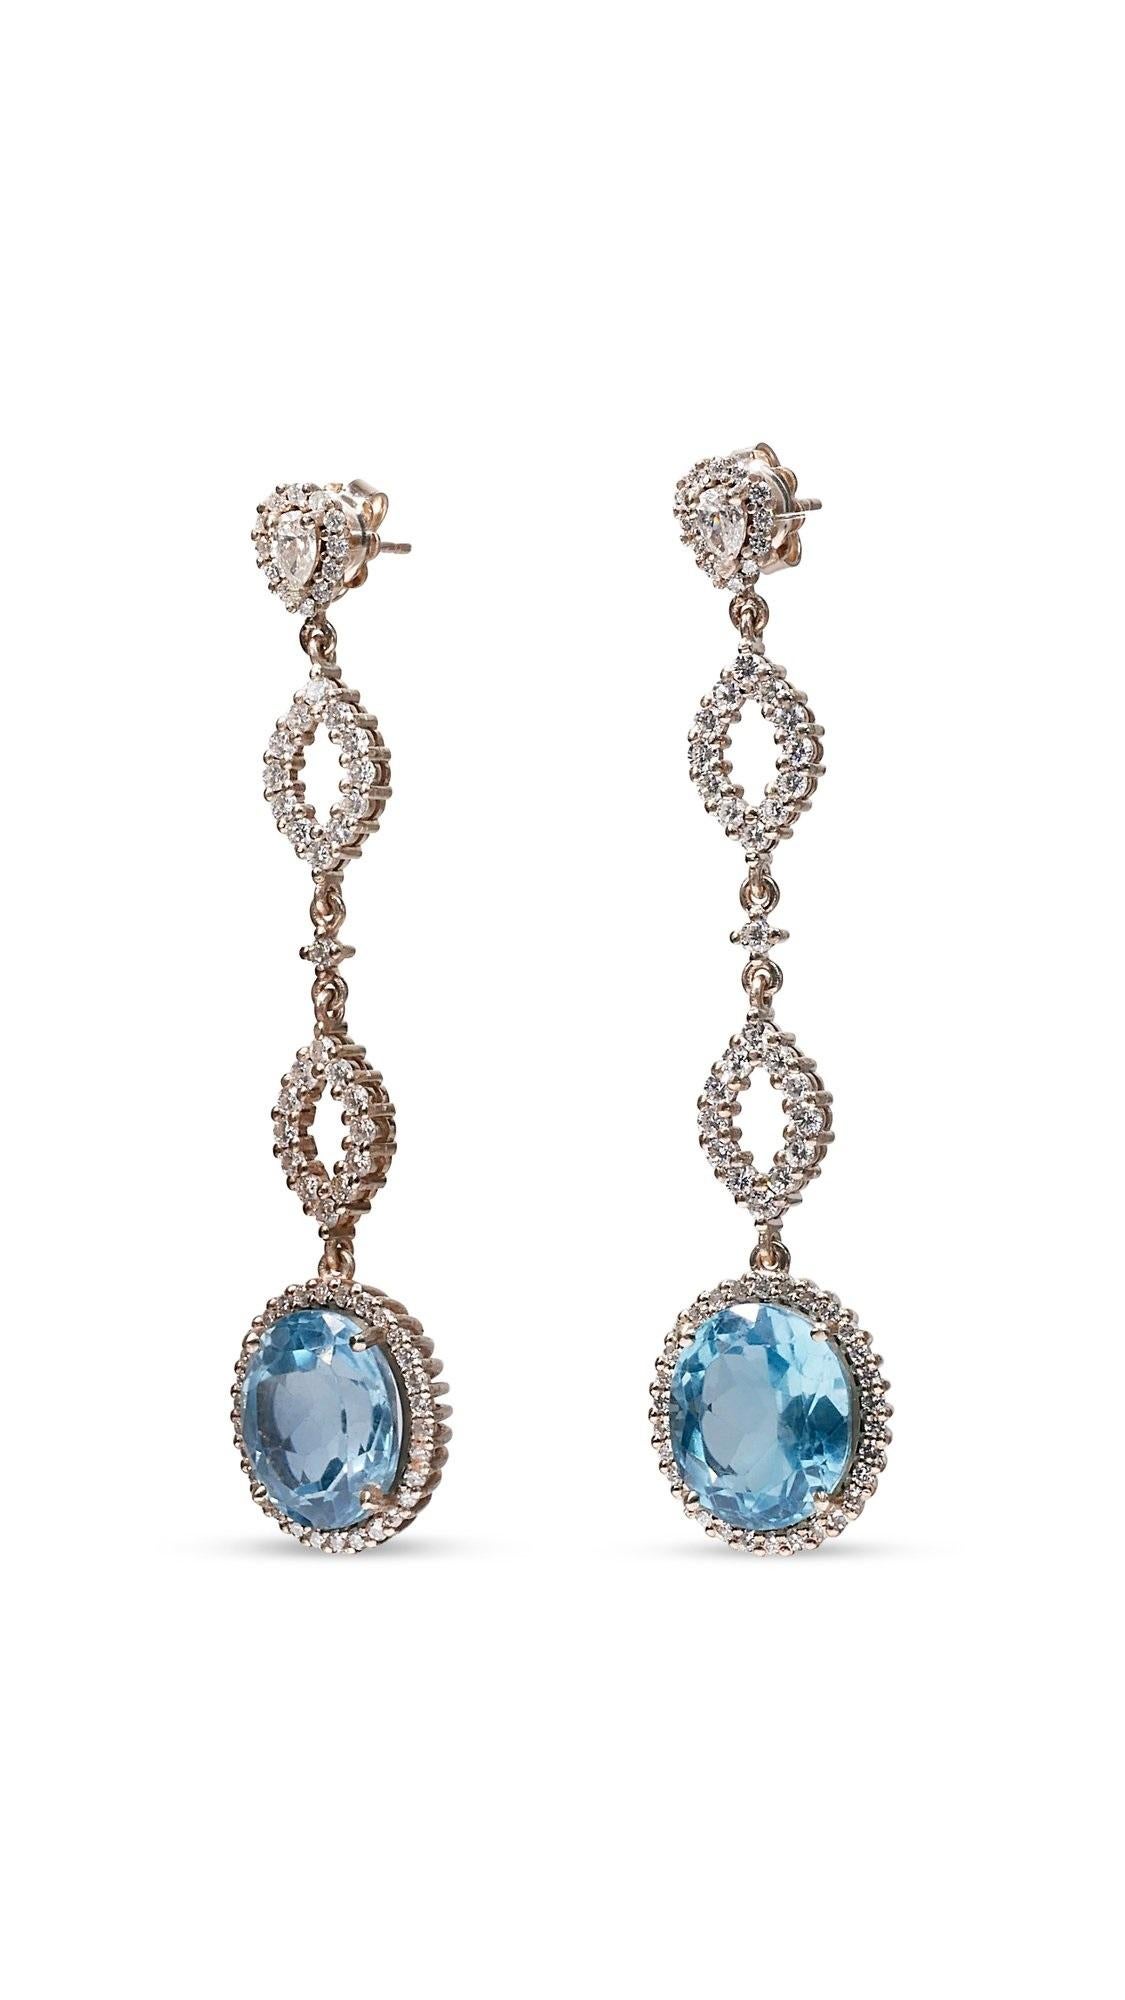 18k White Gold Drop Earrings with 17.37 ct Natural Topaz and Diamonds IGI Cert In New Condition For Sale In רמת גן, IL